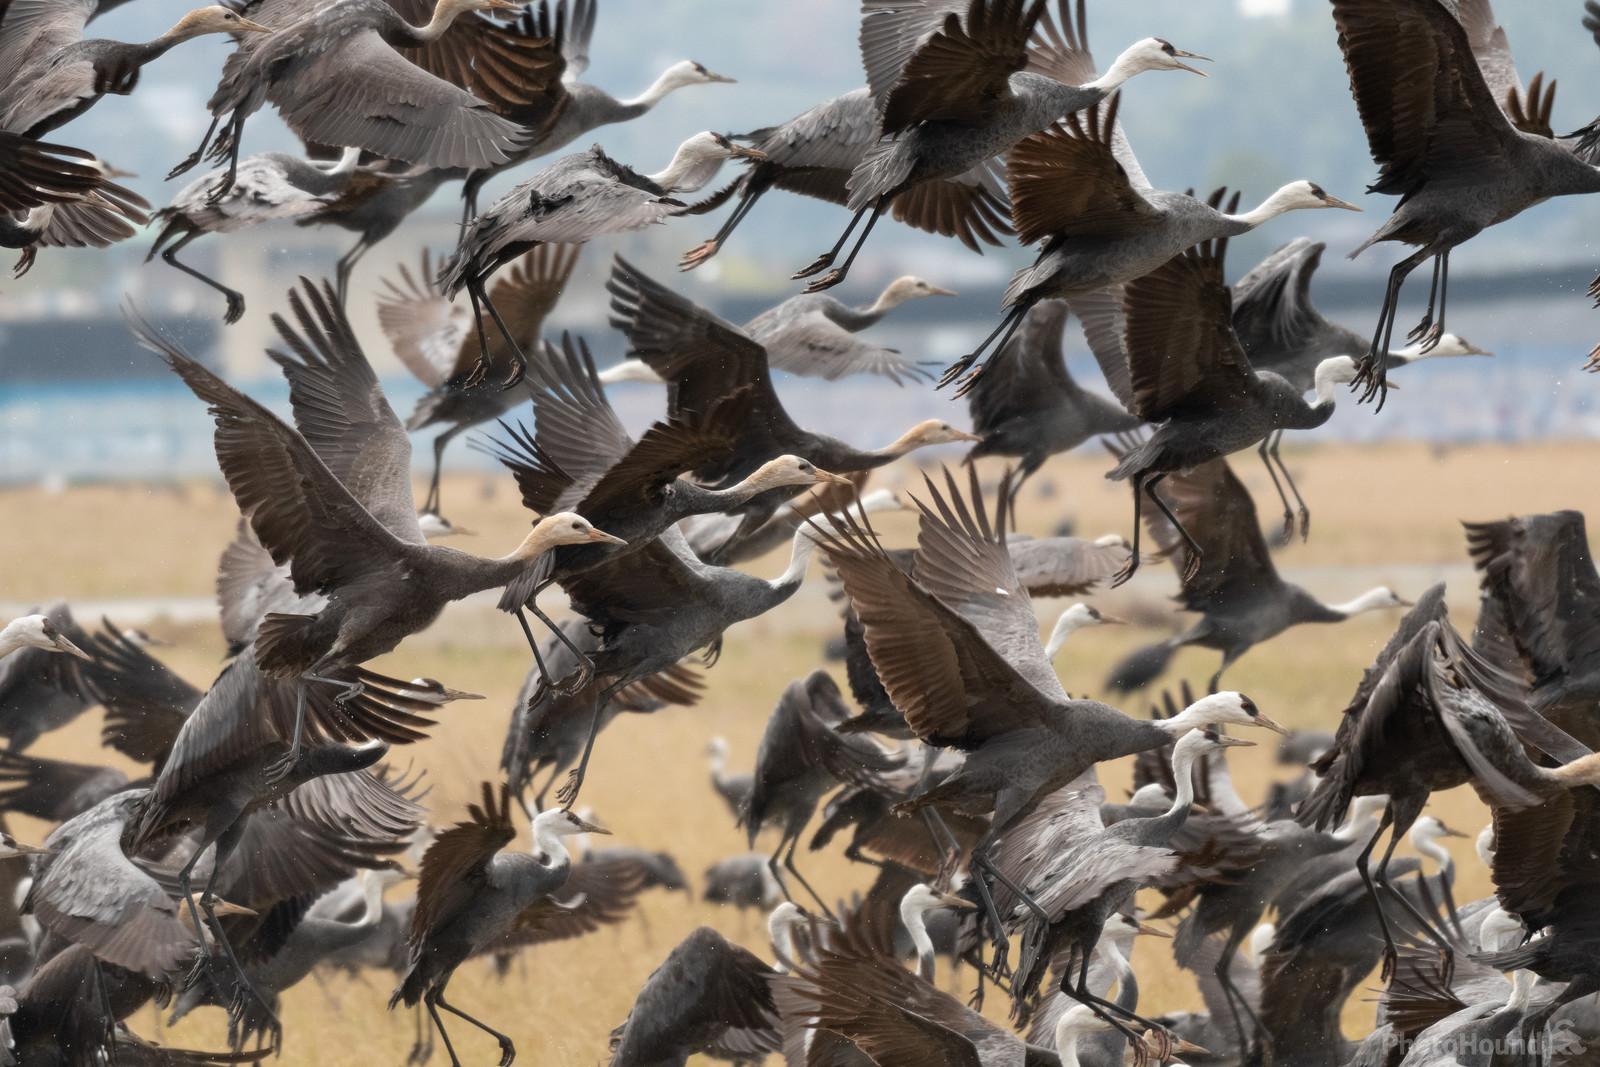 Image of Izumi Crane Migration Grounds by Colette English